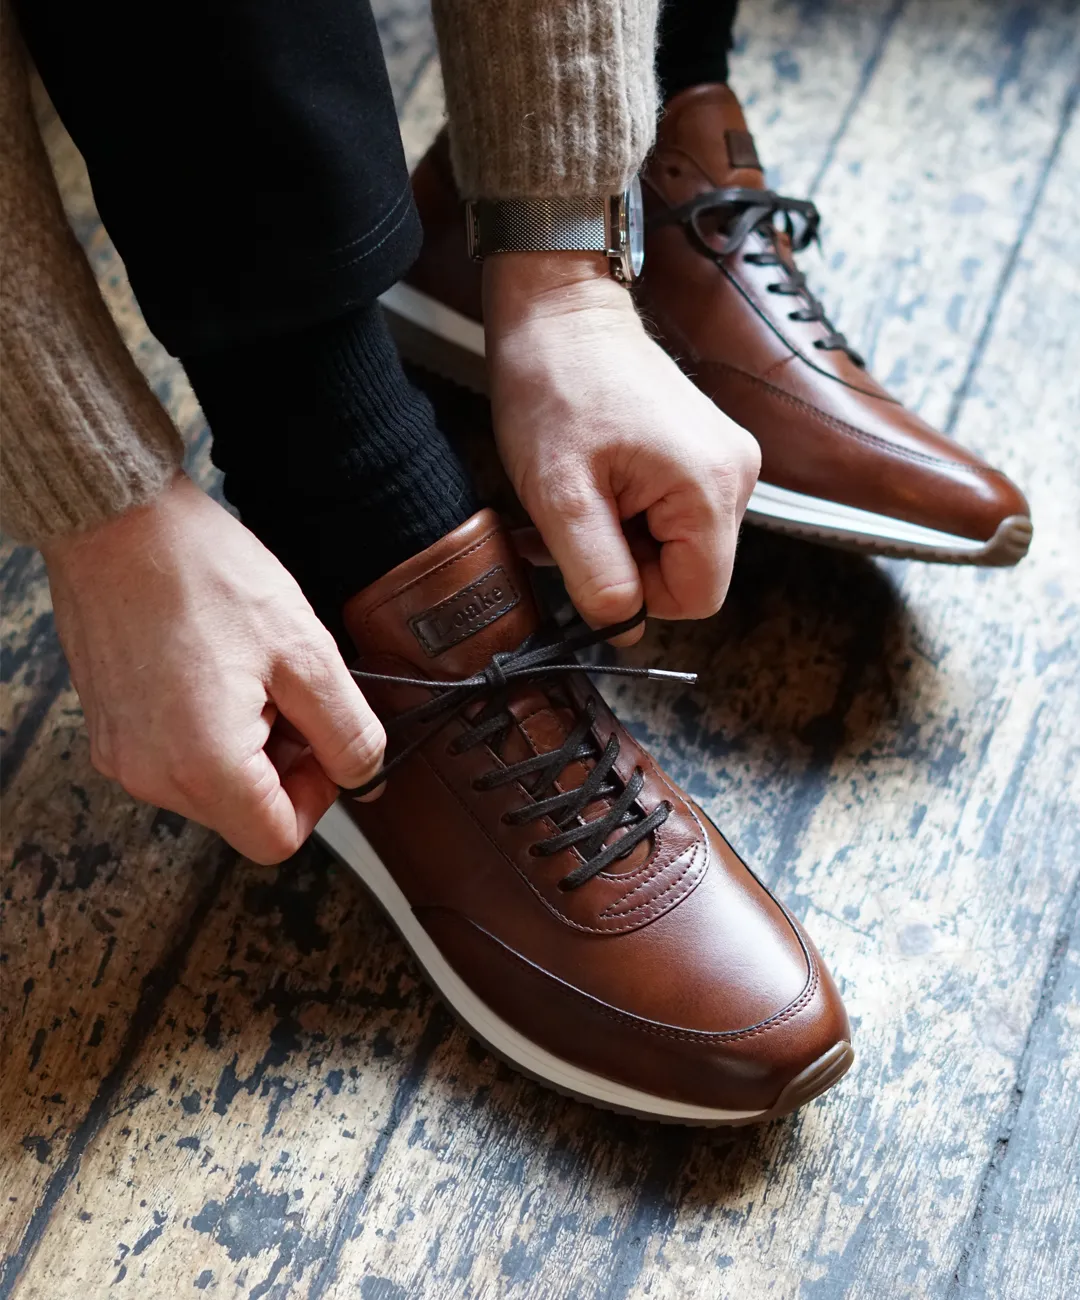 Man tying up his trainers in a public setting. Shoes shown are Bannister in cedar calf